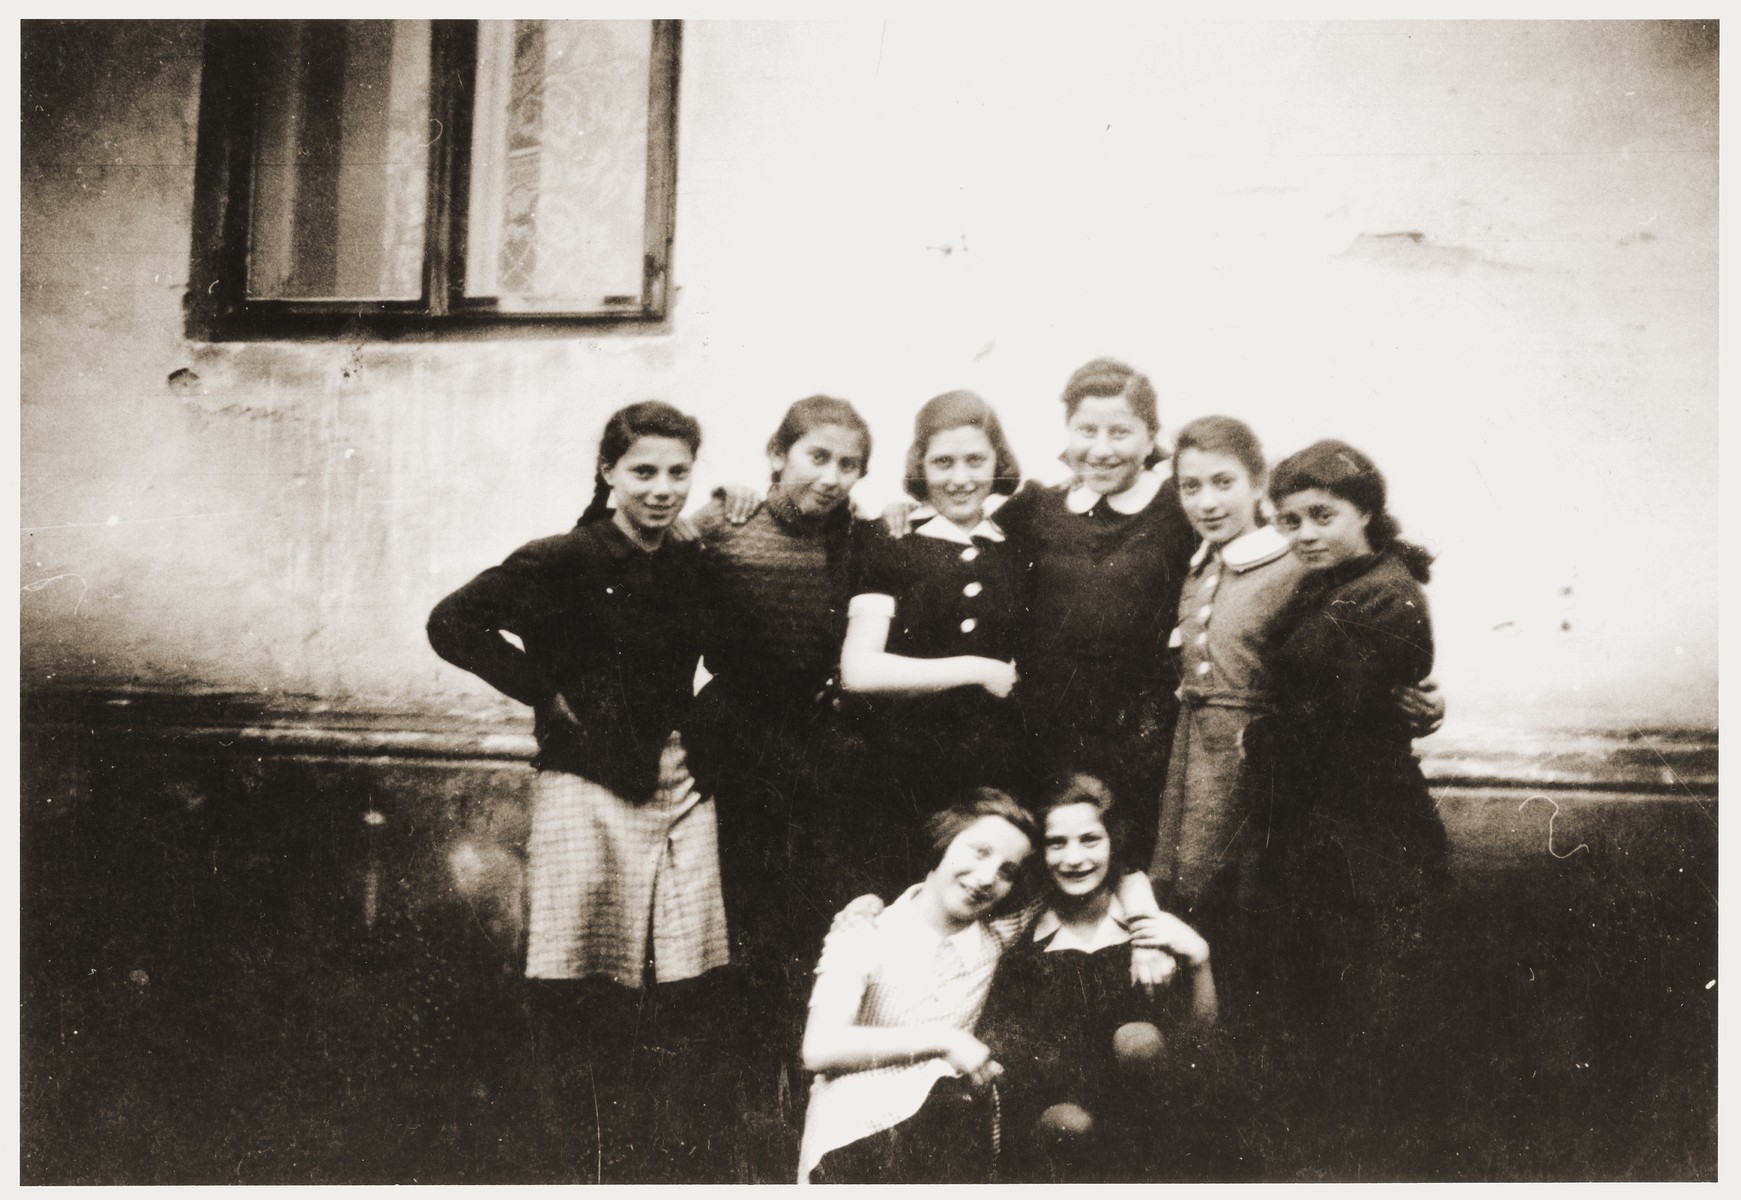 Group portrait of Jewish girls in the Zabno ghetto taken on the occasion of the twelfth birthday of Hania Goldman.

Among those pictured are Hania Goldman (bottom left) and her sister, Rachela (standing third from the right).